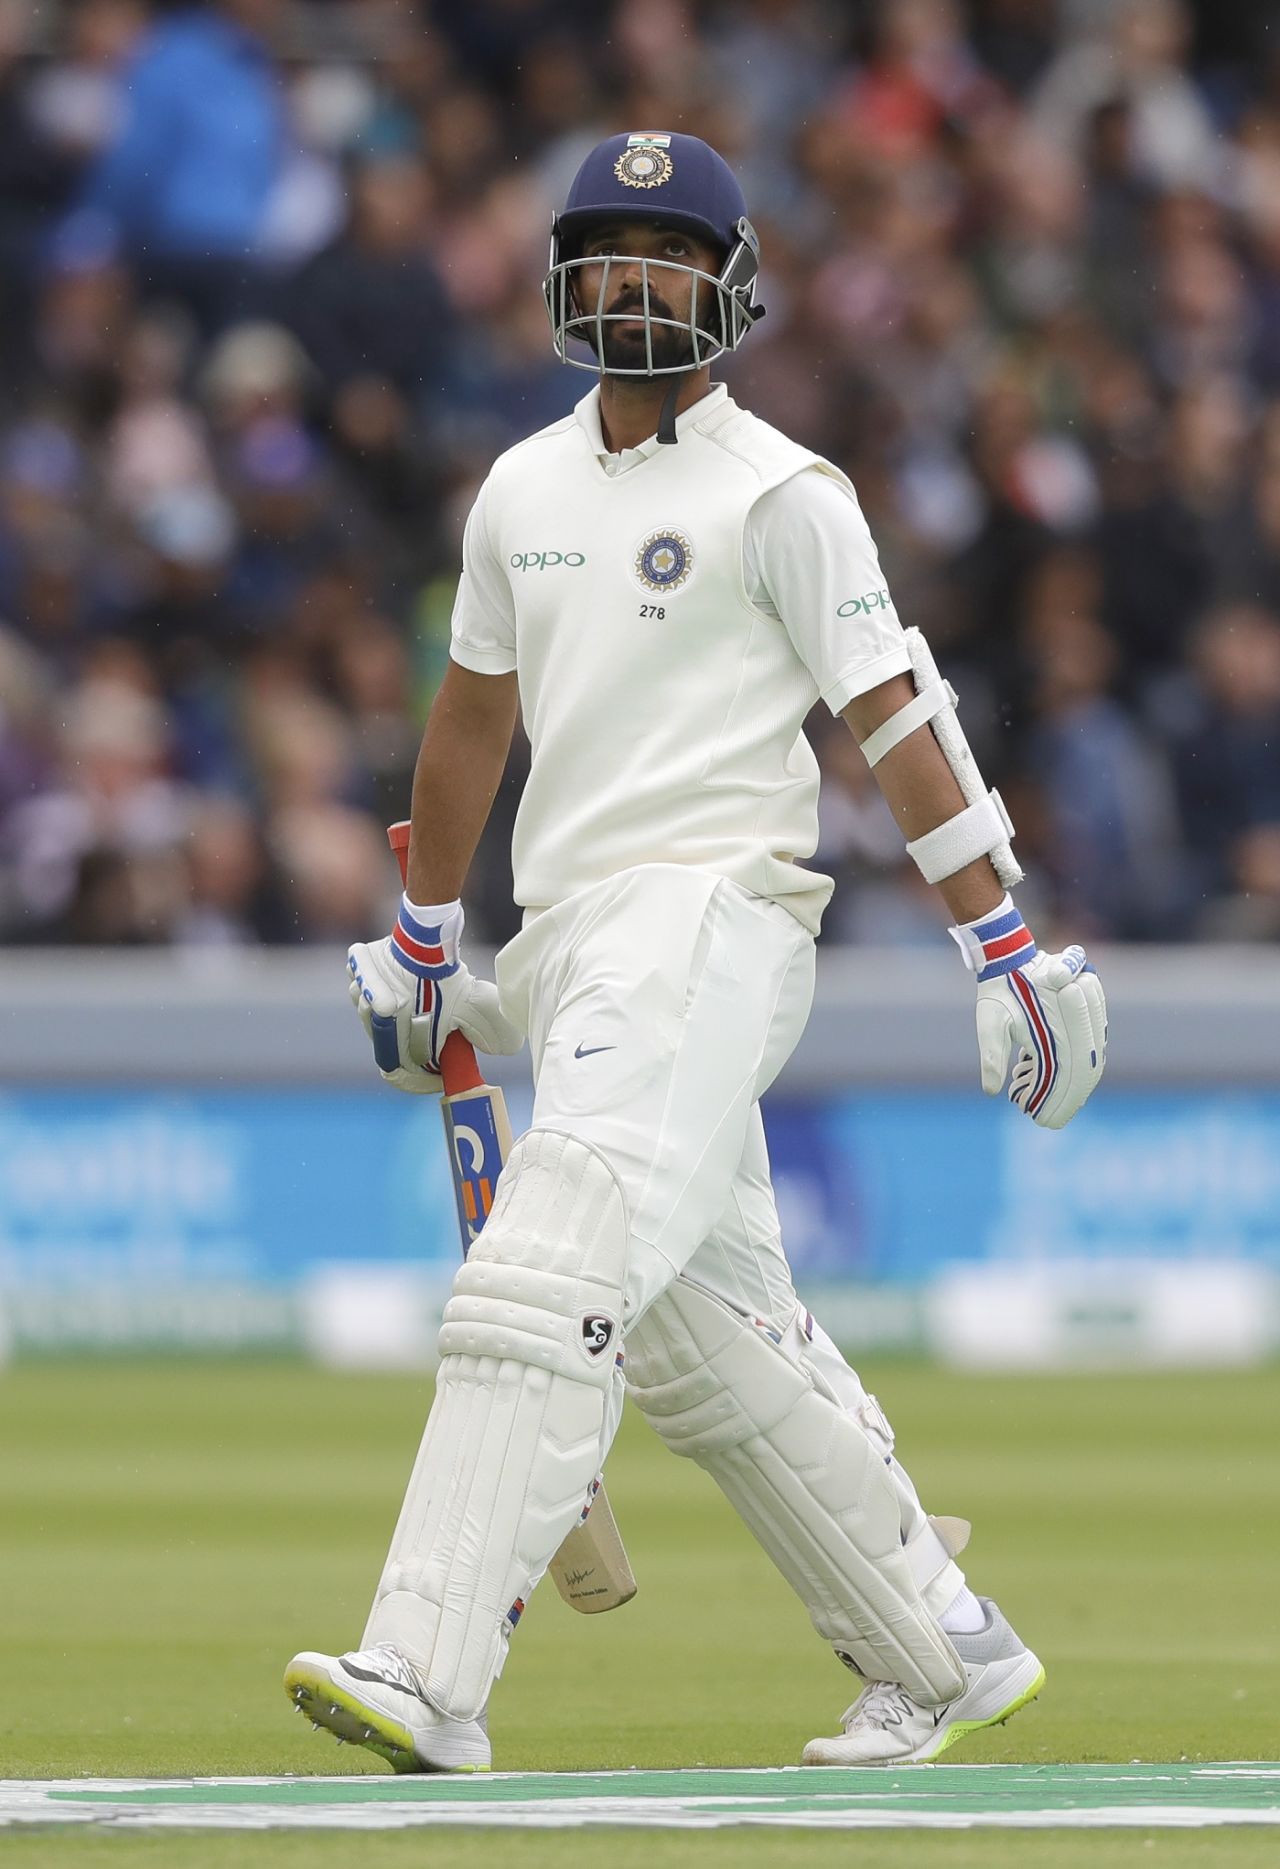 Ajinkya Rahane walks back after being dismissed by Stuart Broad, England vs India, 2nd Test, Day 4, Lord's, August 12, 2018